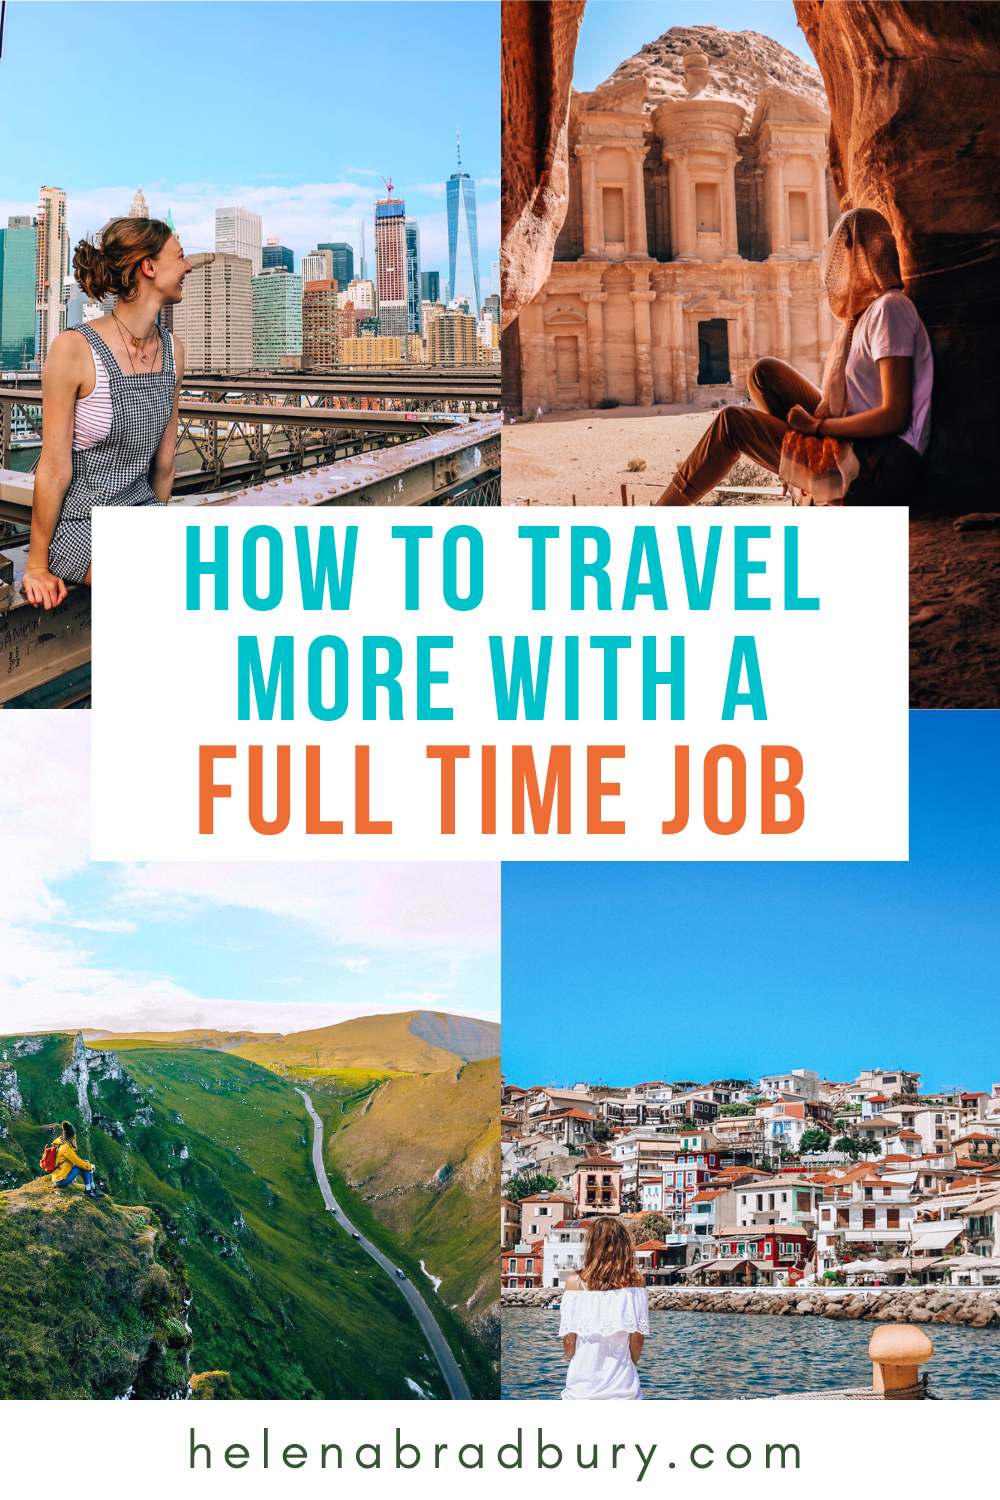 So you want to know how to travel more with a full time job? I’ve visited 30+ countries in the last 7 years of working full time and here’s how to work and travel more without quitting your job, how to travel with a full time job and how to travel m…